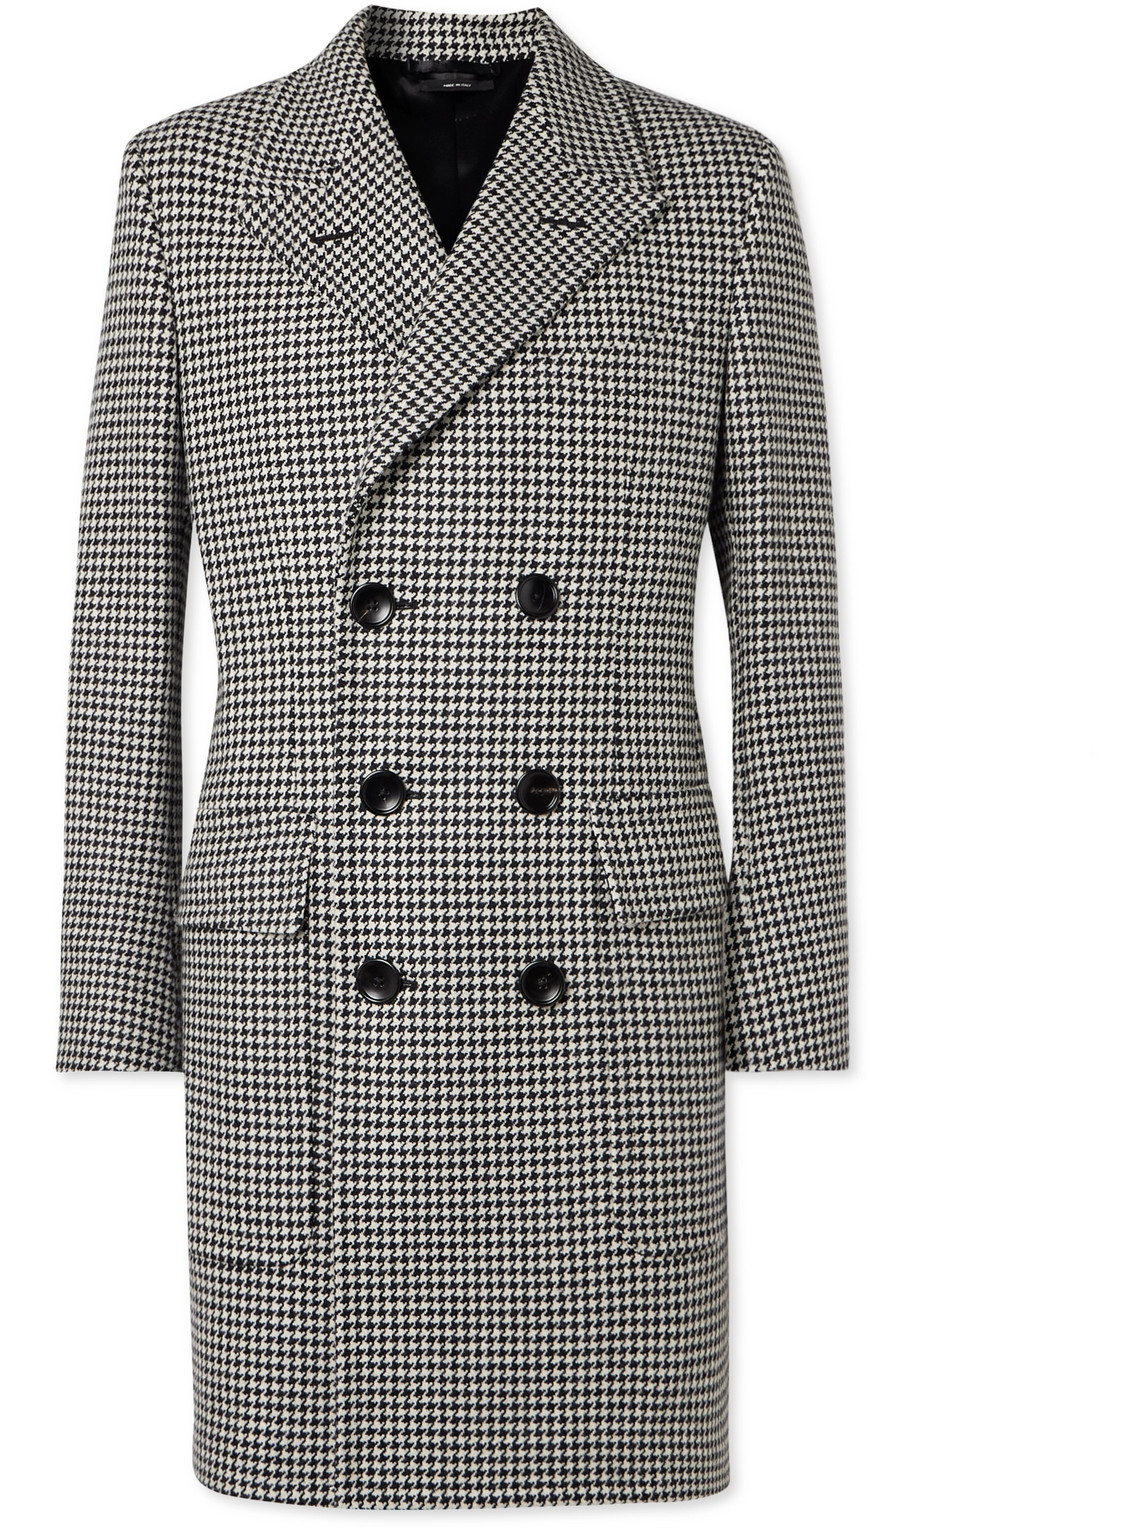 Slim-Fit Double-Breasted Houndstooth Wool Coat